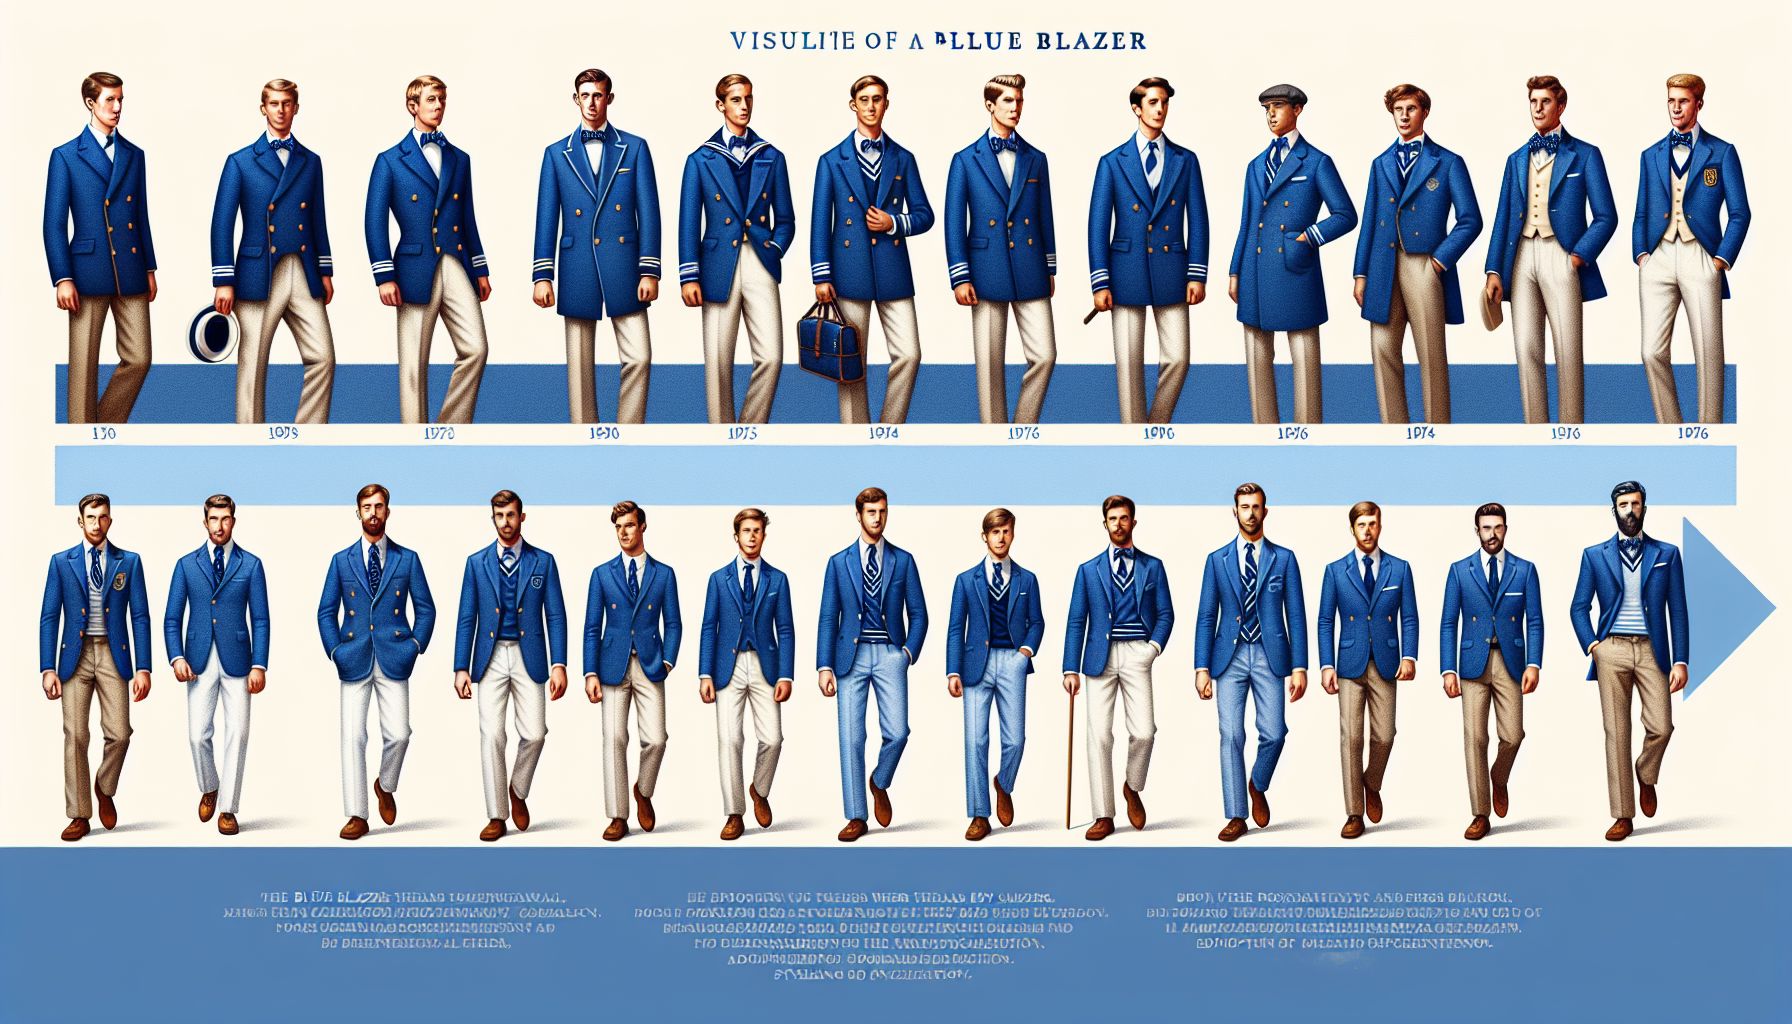 The Royal Treatment: How Blue Blazers Became a Symbol of Sophistication